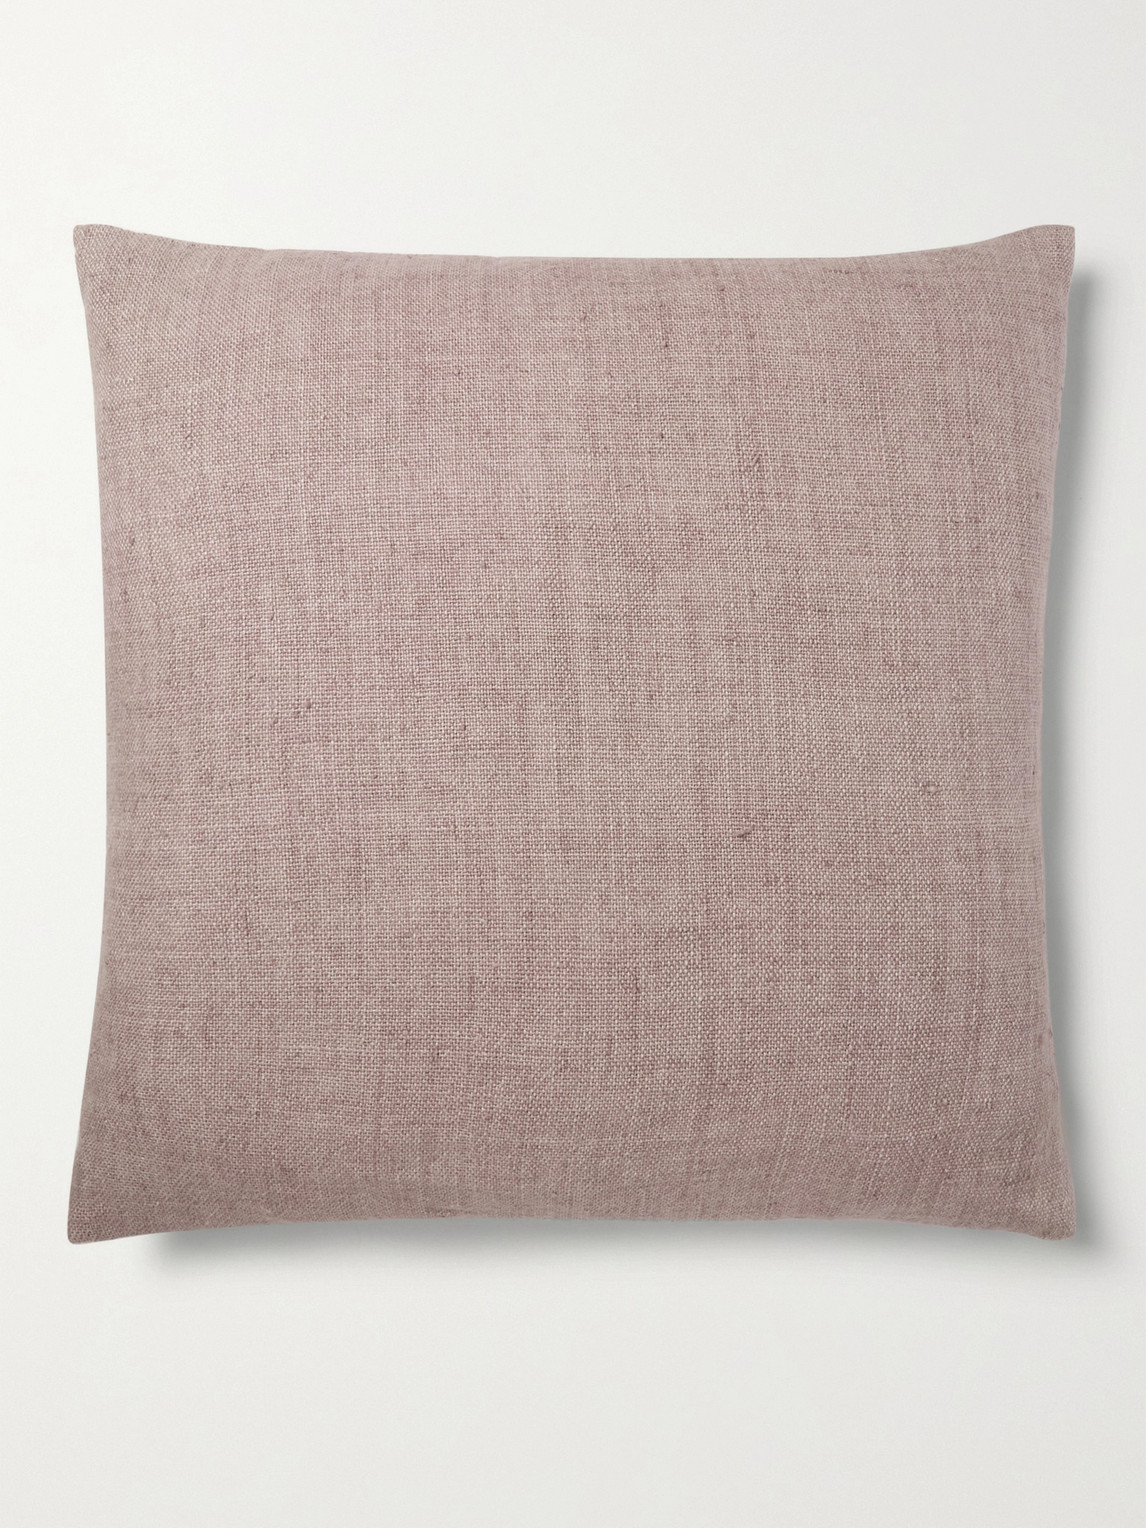 Roman & Williams Guild Linen Cushion Cover In Pink